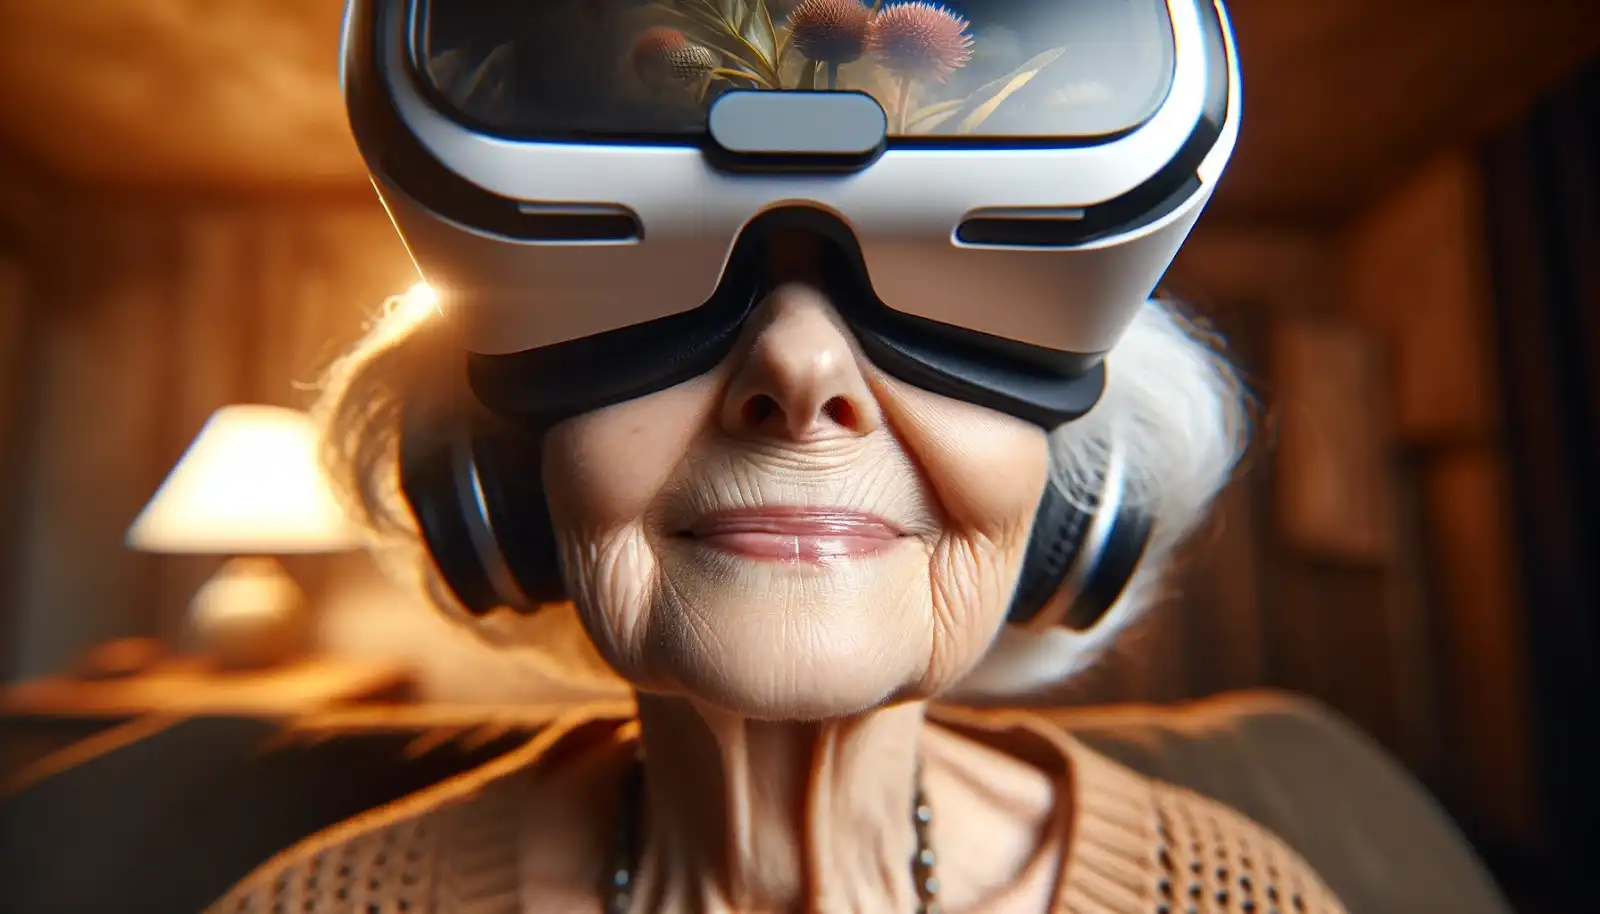 Close-up image of an old lady smiling wearing VR headsets.